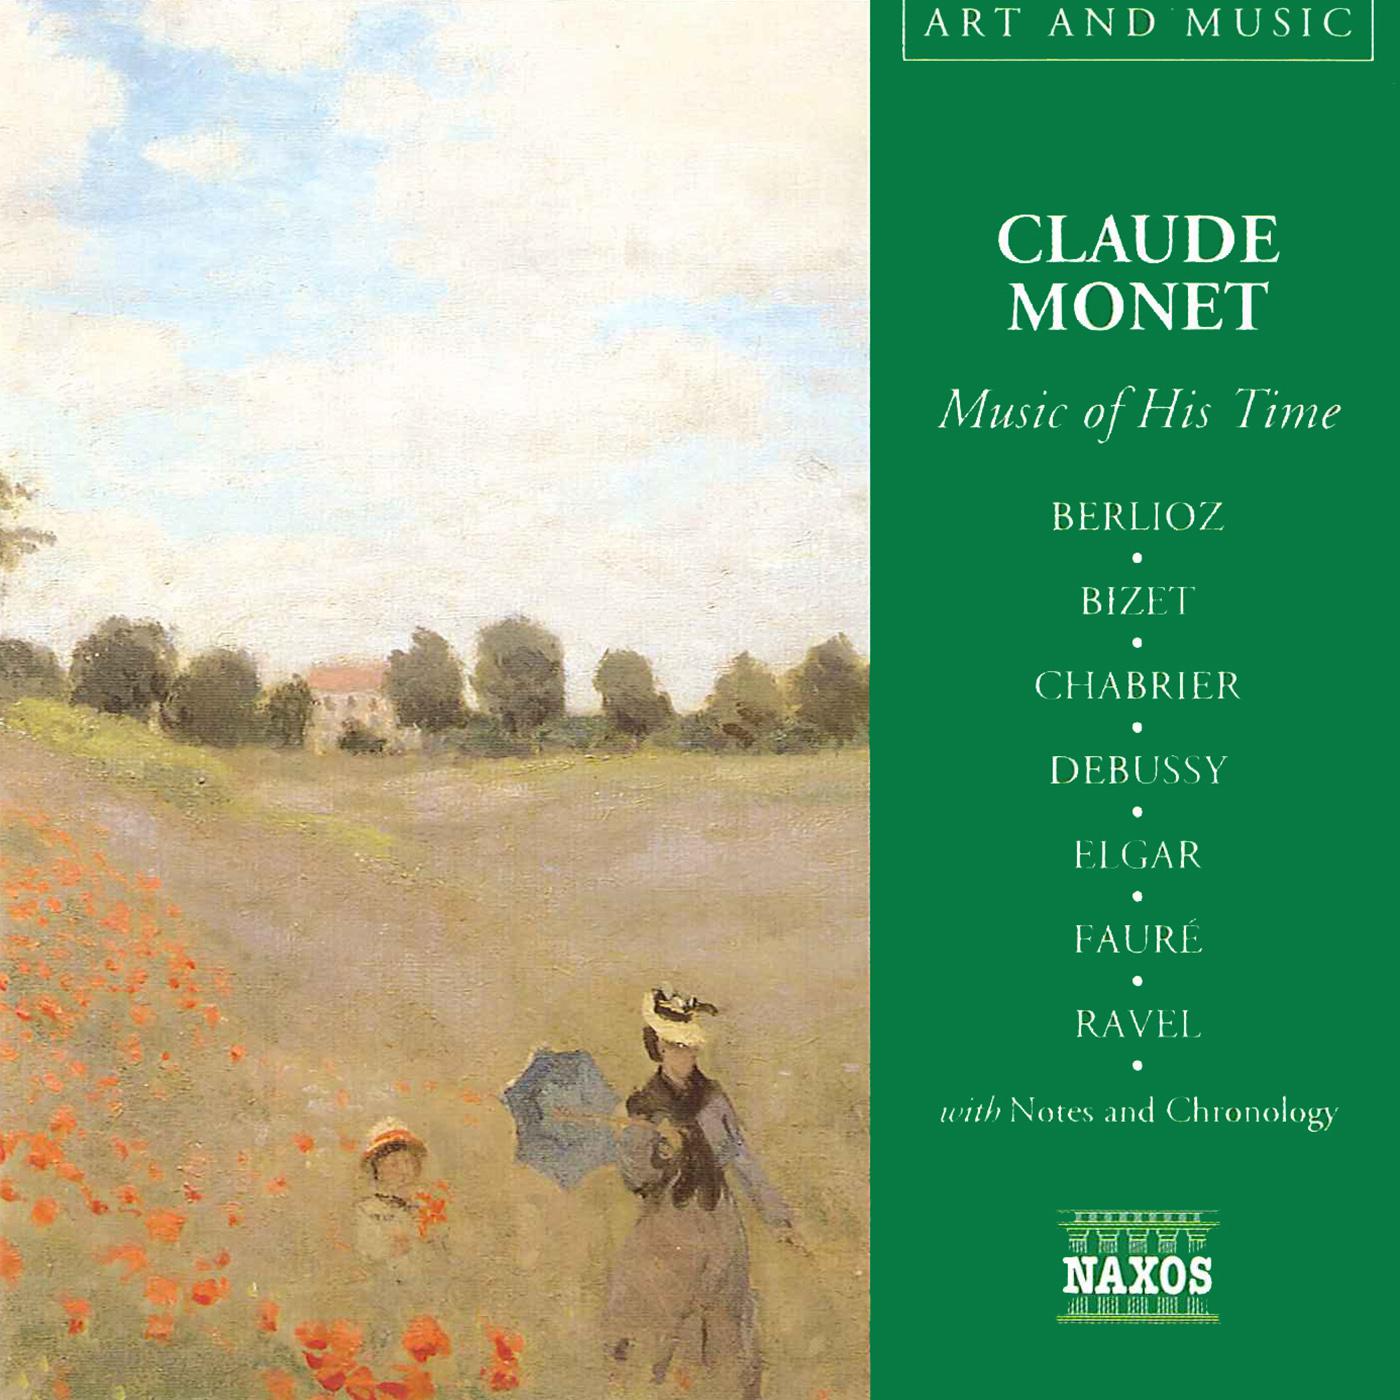 Art and Music: Monet - Music of His Time